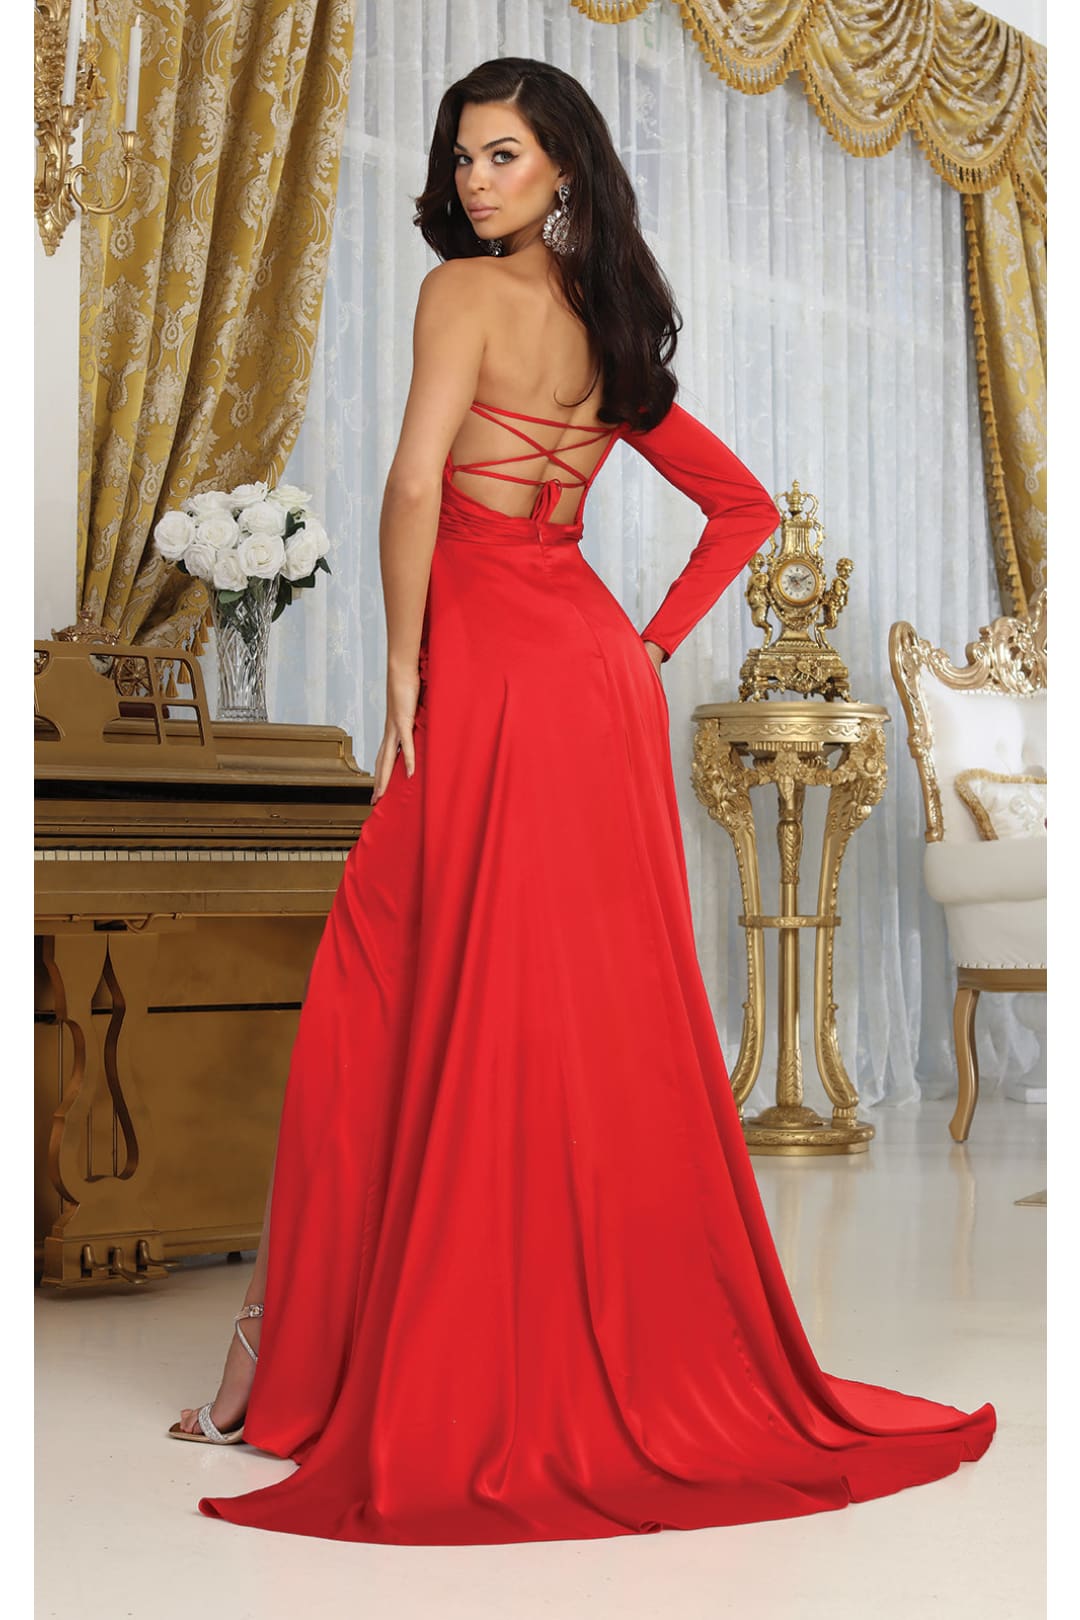 May Queen MQ1985 Satin Strappy Back One Sleeve Prom Evening Gown - Dress